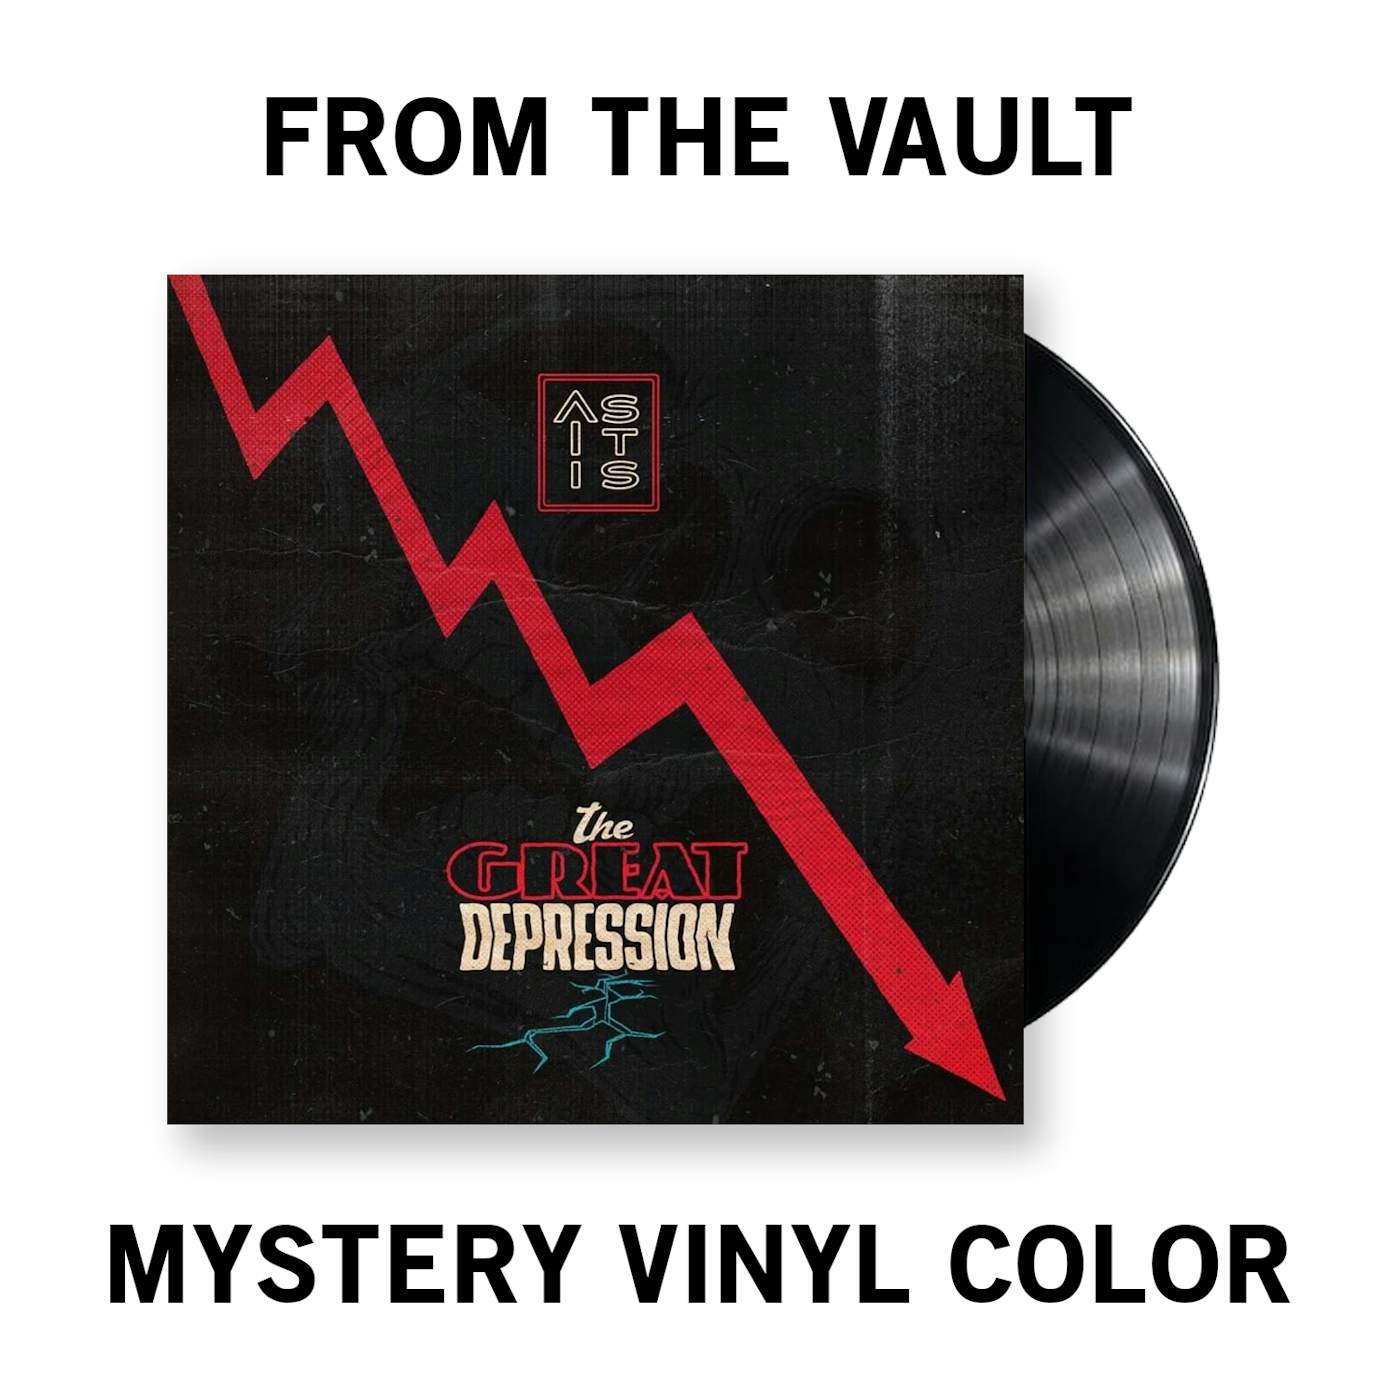 AS IT IS The Great Depression Vinyl